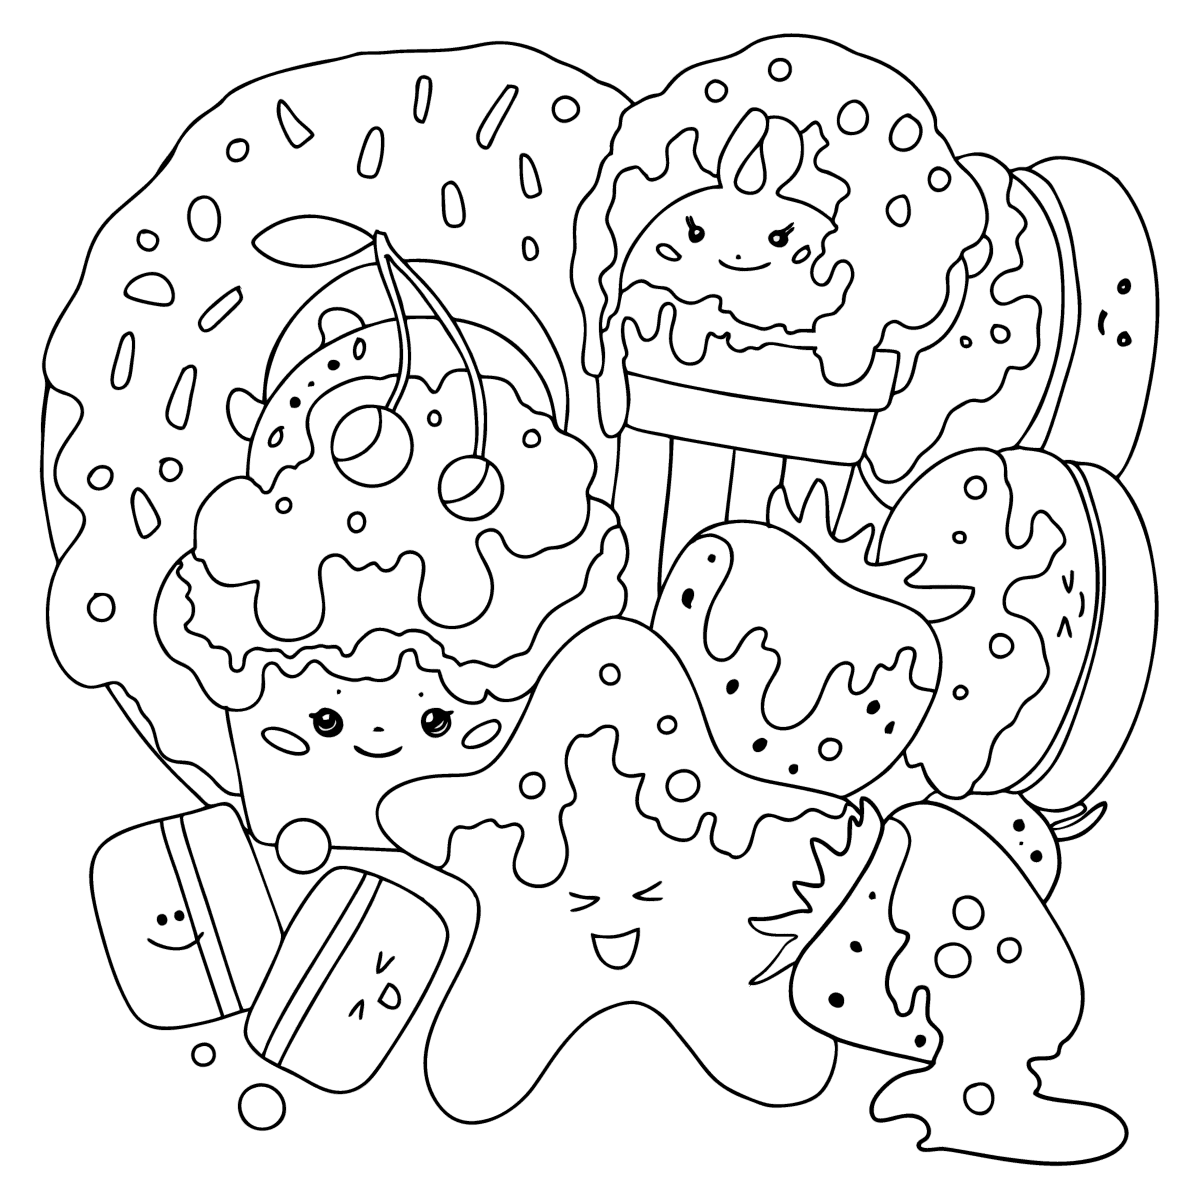 Kawaii goodies - Kawaii coloring pages for Adults online